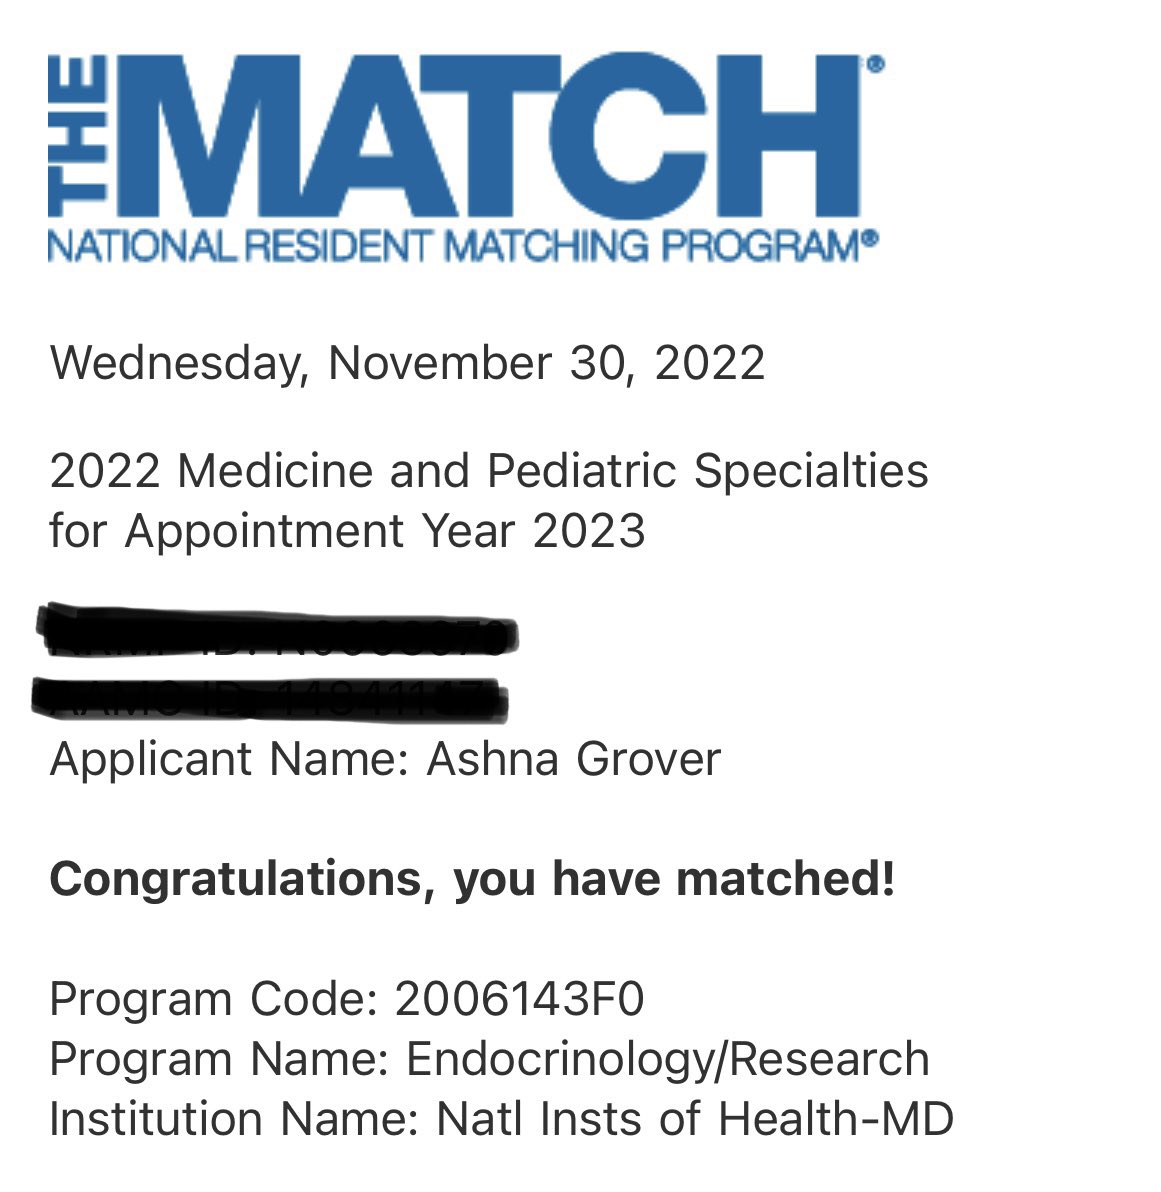 Excited to have matched at NIH for endocrinology fellowship! Grateful to my mentors, family, and friends, without whom this would not have been possible! @MAHIMRes @NIH #match2022